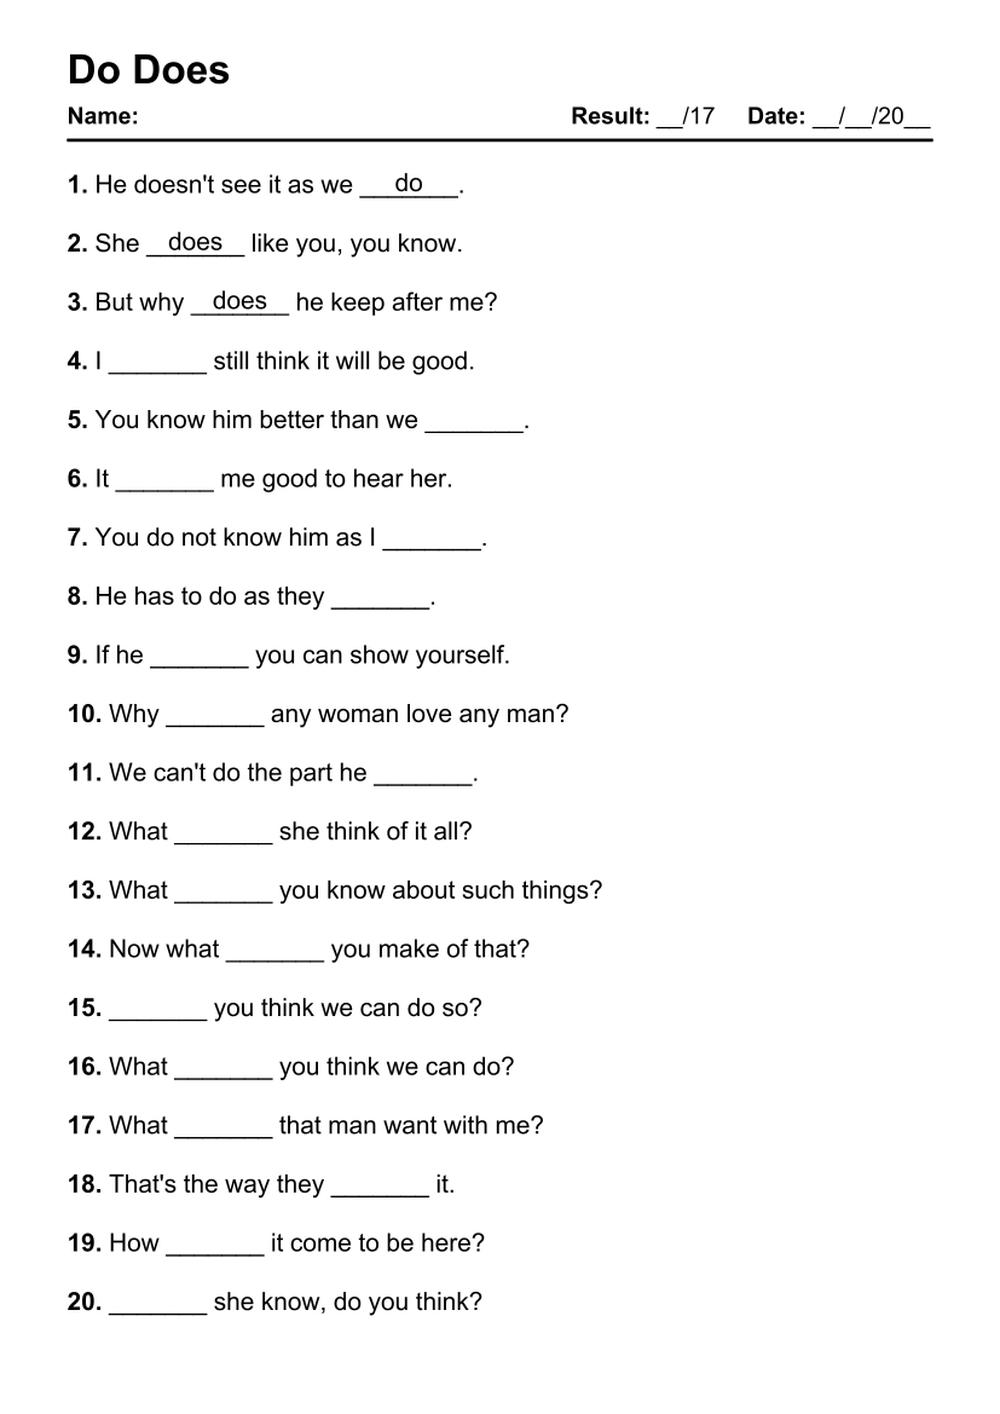 Printable Do Does Exercises - PDF Worksheet with Answers - Test 1